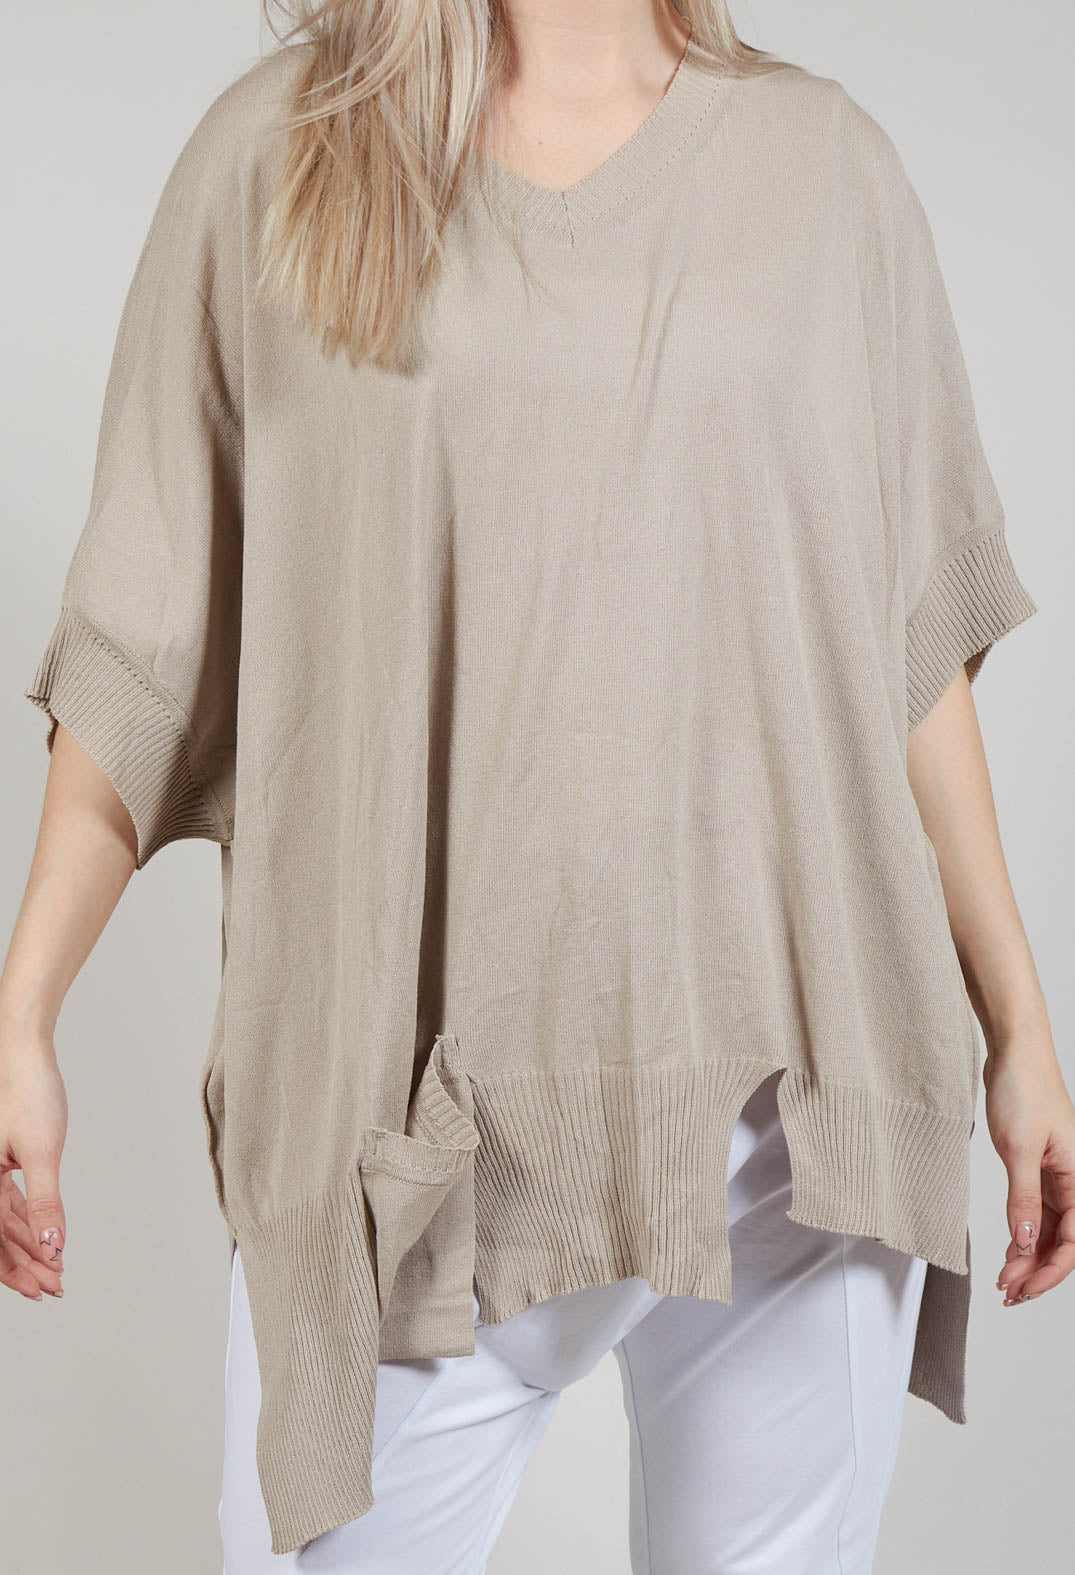 Oversized Knitted Sweater with Dropped Shoulder in Beige